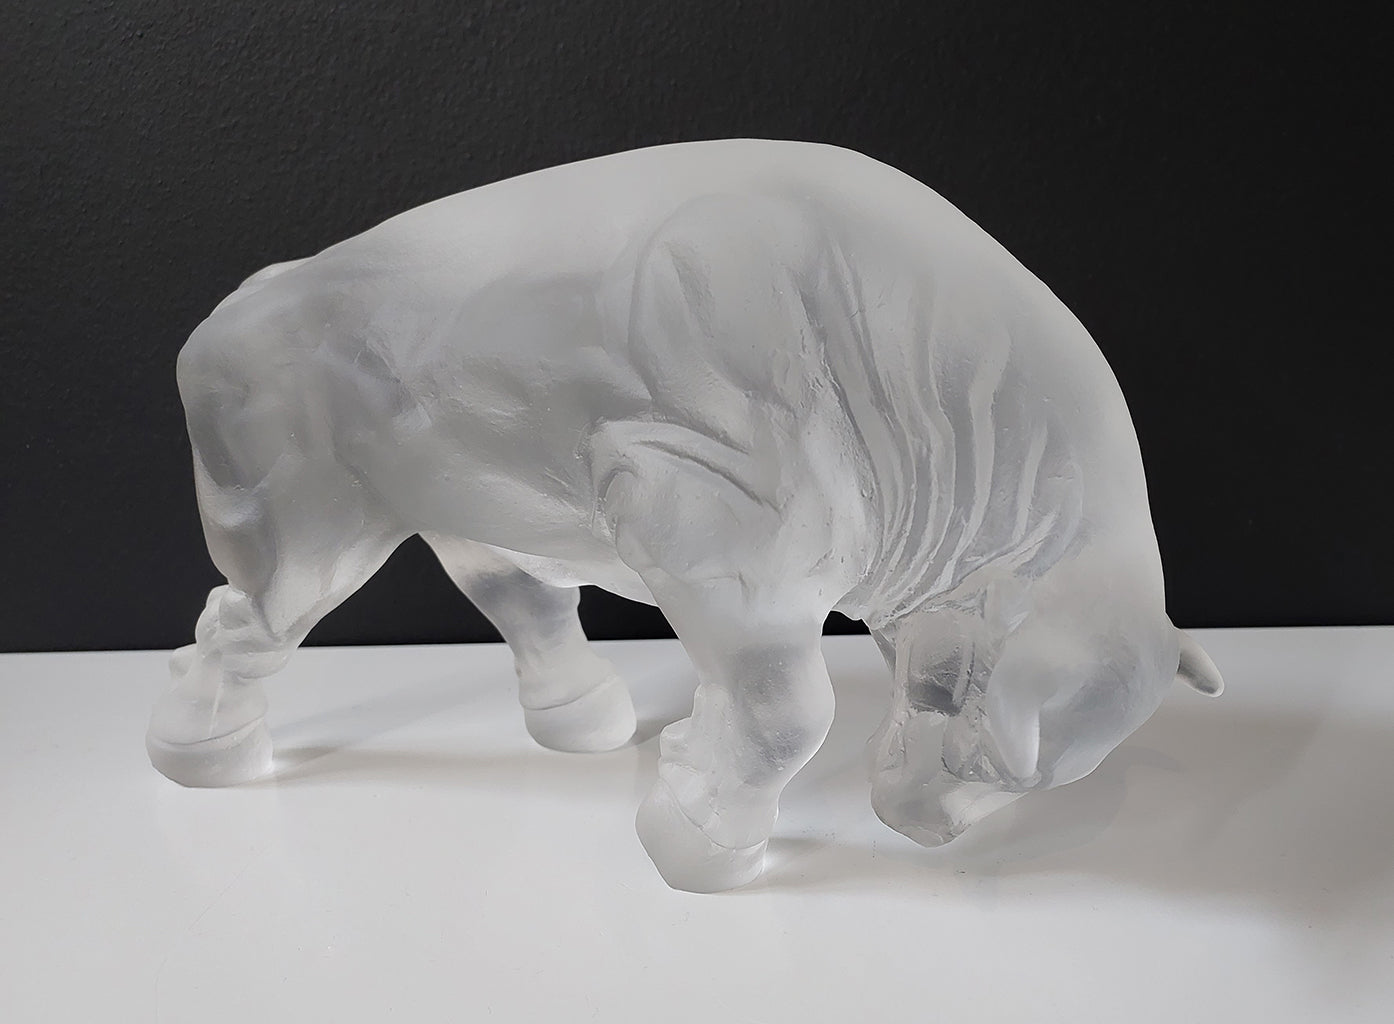 Bull Cast Glass Sculpture Ice on black and white background